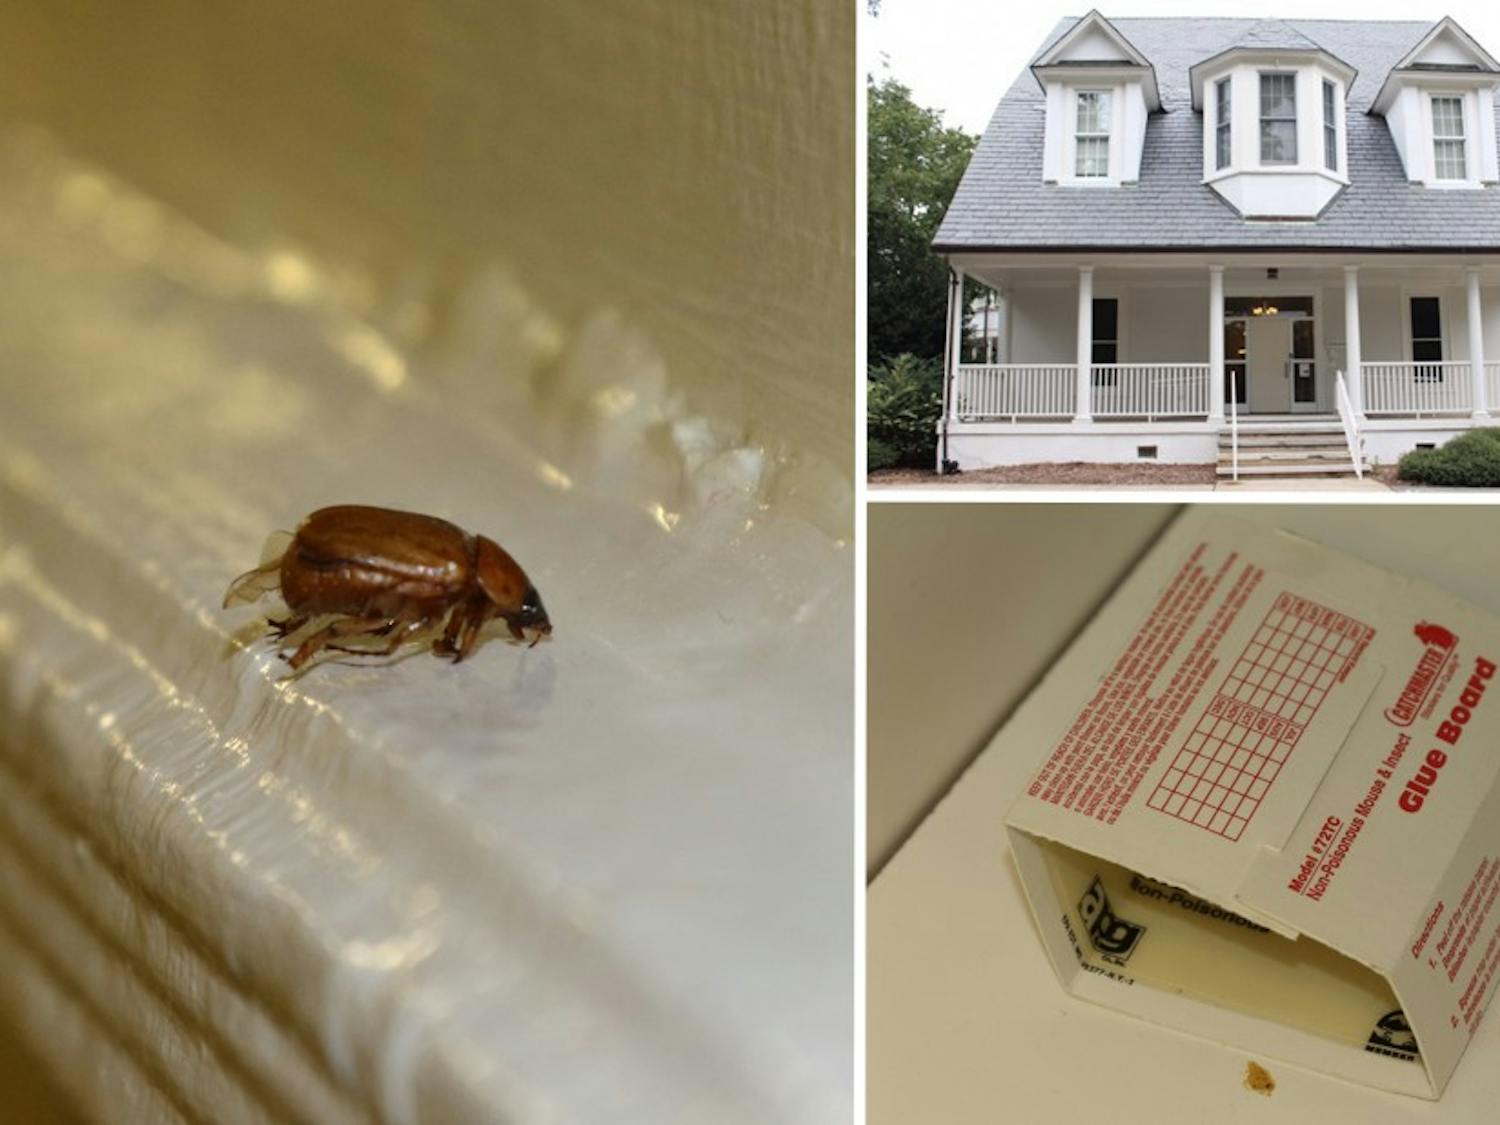 Epworth residence hall on East Campus will be closed during Fall Break for insect&nbsp;extermination.